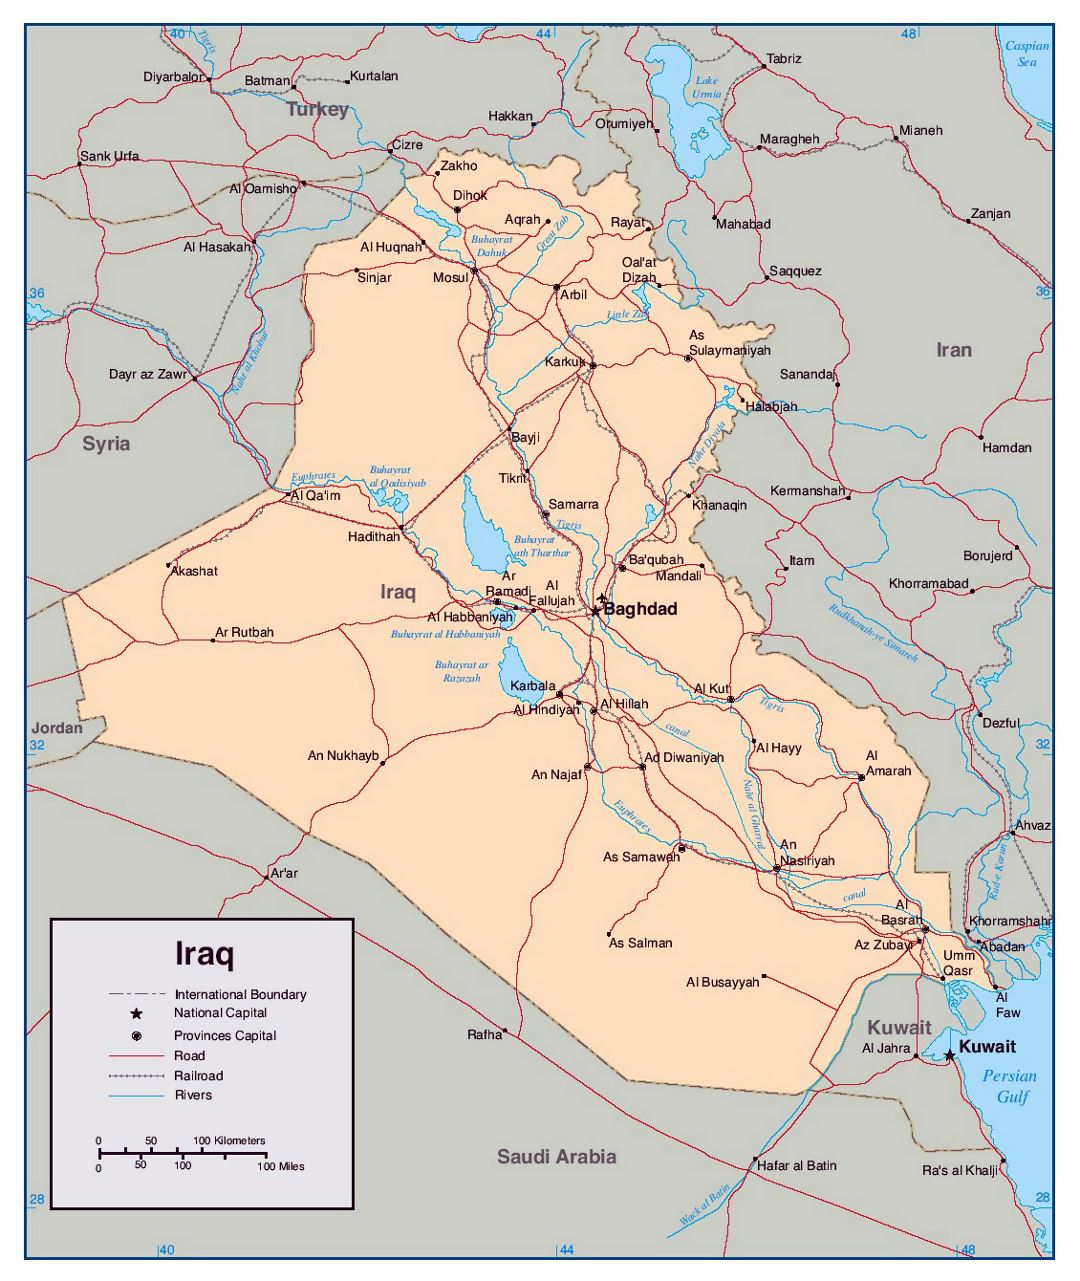 Detailed political map of Iraq with rivers, roads, railroads and major cities